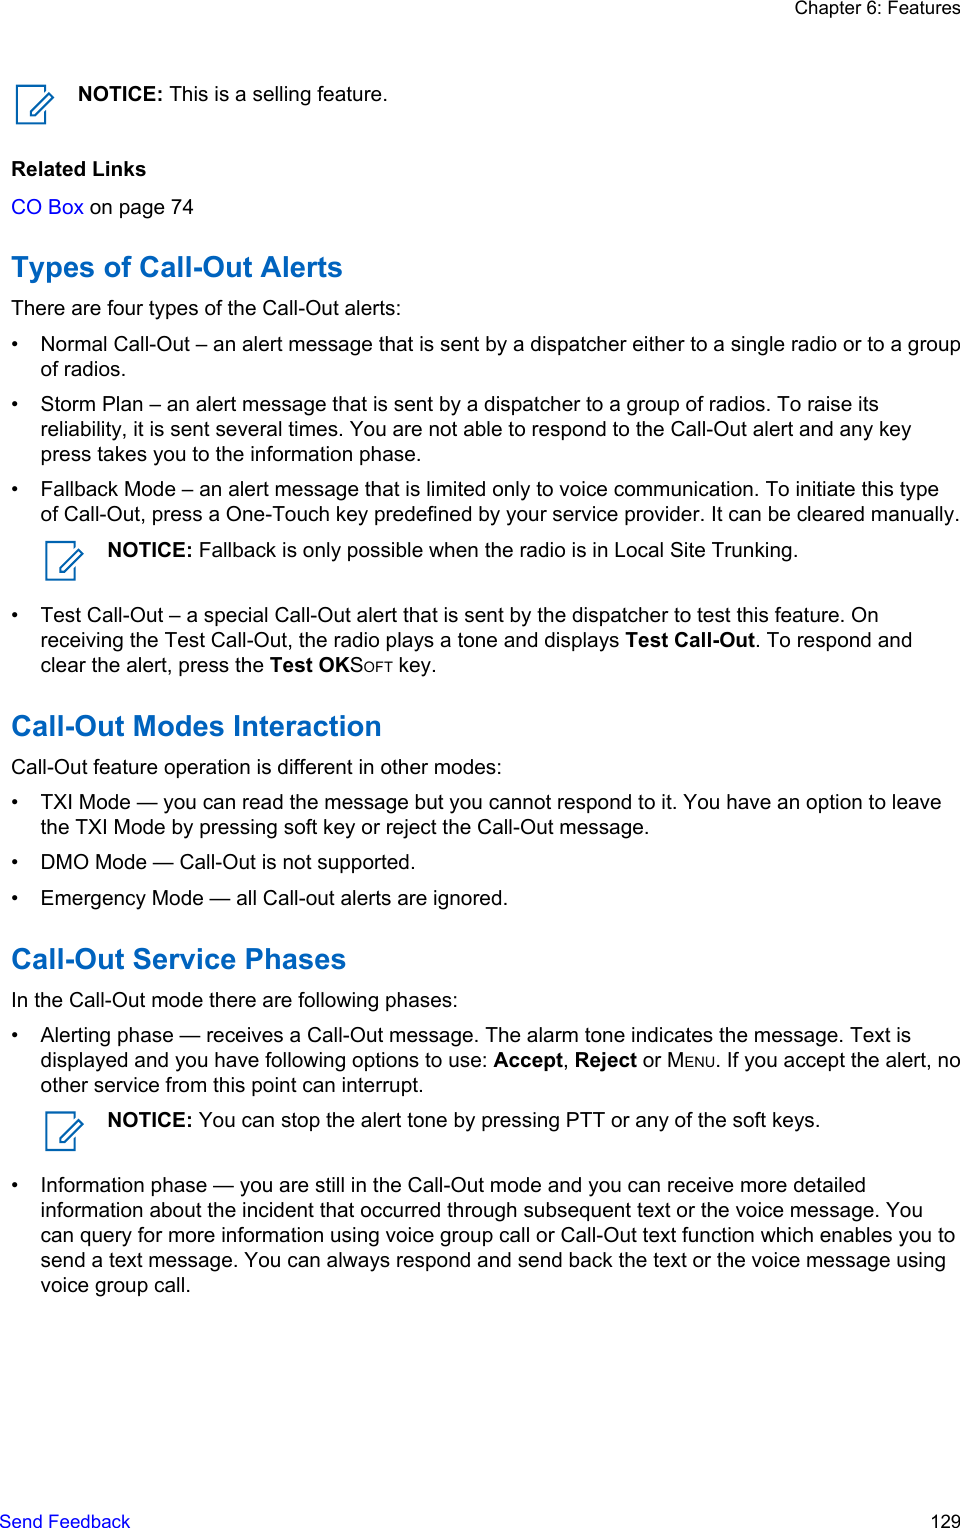 NOTICE: This is a selling feature.Related LinksCO Box on page 74Types of Call-Out AlertsThere are four types of the Call-Out alerts:• Normal Call-Out – an alert message that is sent by a dispatcher either to a single radio or to a groupof radios.• Storm Plan – an alert message that is sent by a dispatcher to a group of radios. To raise itsreliability, it is sent several times. You are not able to respond to the Call-Out alert and any keypress takes you to the information phase.• Fallback Mode – an alert message that is limited only to voice communication. To initiate this typeof Call-Out, press a One-Touch key predefined by your service provider. It can be cleared manually.NOTICE: Fallback is only possible when the radio is in Local Site Trunking.• Test Call-Out – a special Call-Out alert that is sent by the dispatcher to test this feature. Onreceiving the Test Call-Out, the radio plays a tone and displays Test Call-Out. To respond andclear the alert, press the Test OKSOFT key.Call-Out Modes InteractionCall-Out feature operation is different in other modes:• TXI Mode — you can read the message but you cannot respond to it. You have an option to leavethe TXI Mode by pressing soft key or reject the Call-Out message.• DMO Mode — Call-Out is not supported.• Emergency Mode — all Call-out alerts are ignored.Call-Out Service PhasesIn the Call-Out mode there are following phases:• Alerting phase — receives a Call-Out message. The alarm tone indicates the message. Text isdisplayed and you have following options to use: Accept, Reject or MENU. If you accept the alert, noother service from this point can interrupt.NOTICE: You can stop the alert tone by pressing PTT or any of the soft keys.• Information phase — you are still in the Call-Out mode and you can receive more detailedinformation about the incident that occurred through subsequent text or the voice message. Youcan query for more information using voice group call or Call-Out text function which enables you tosend a text message. You can always respond and send back the text or the voice message usingvoice group call.Chapter 6: FeaturesSend Feedback   129